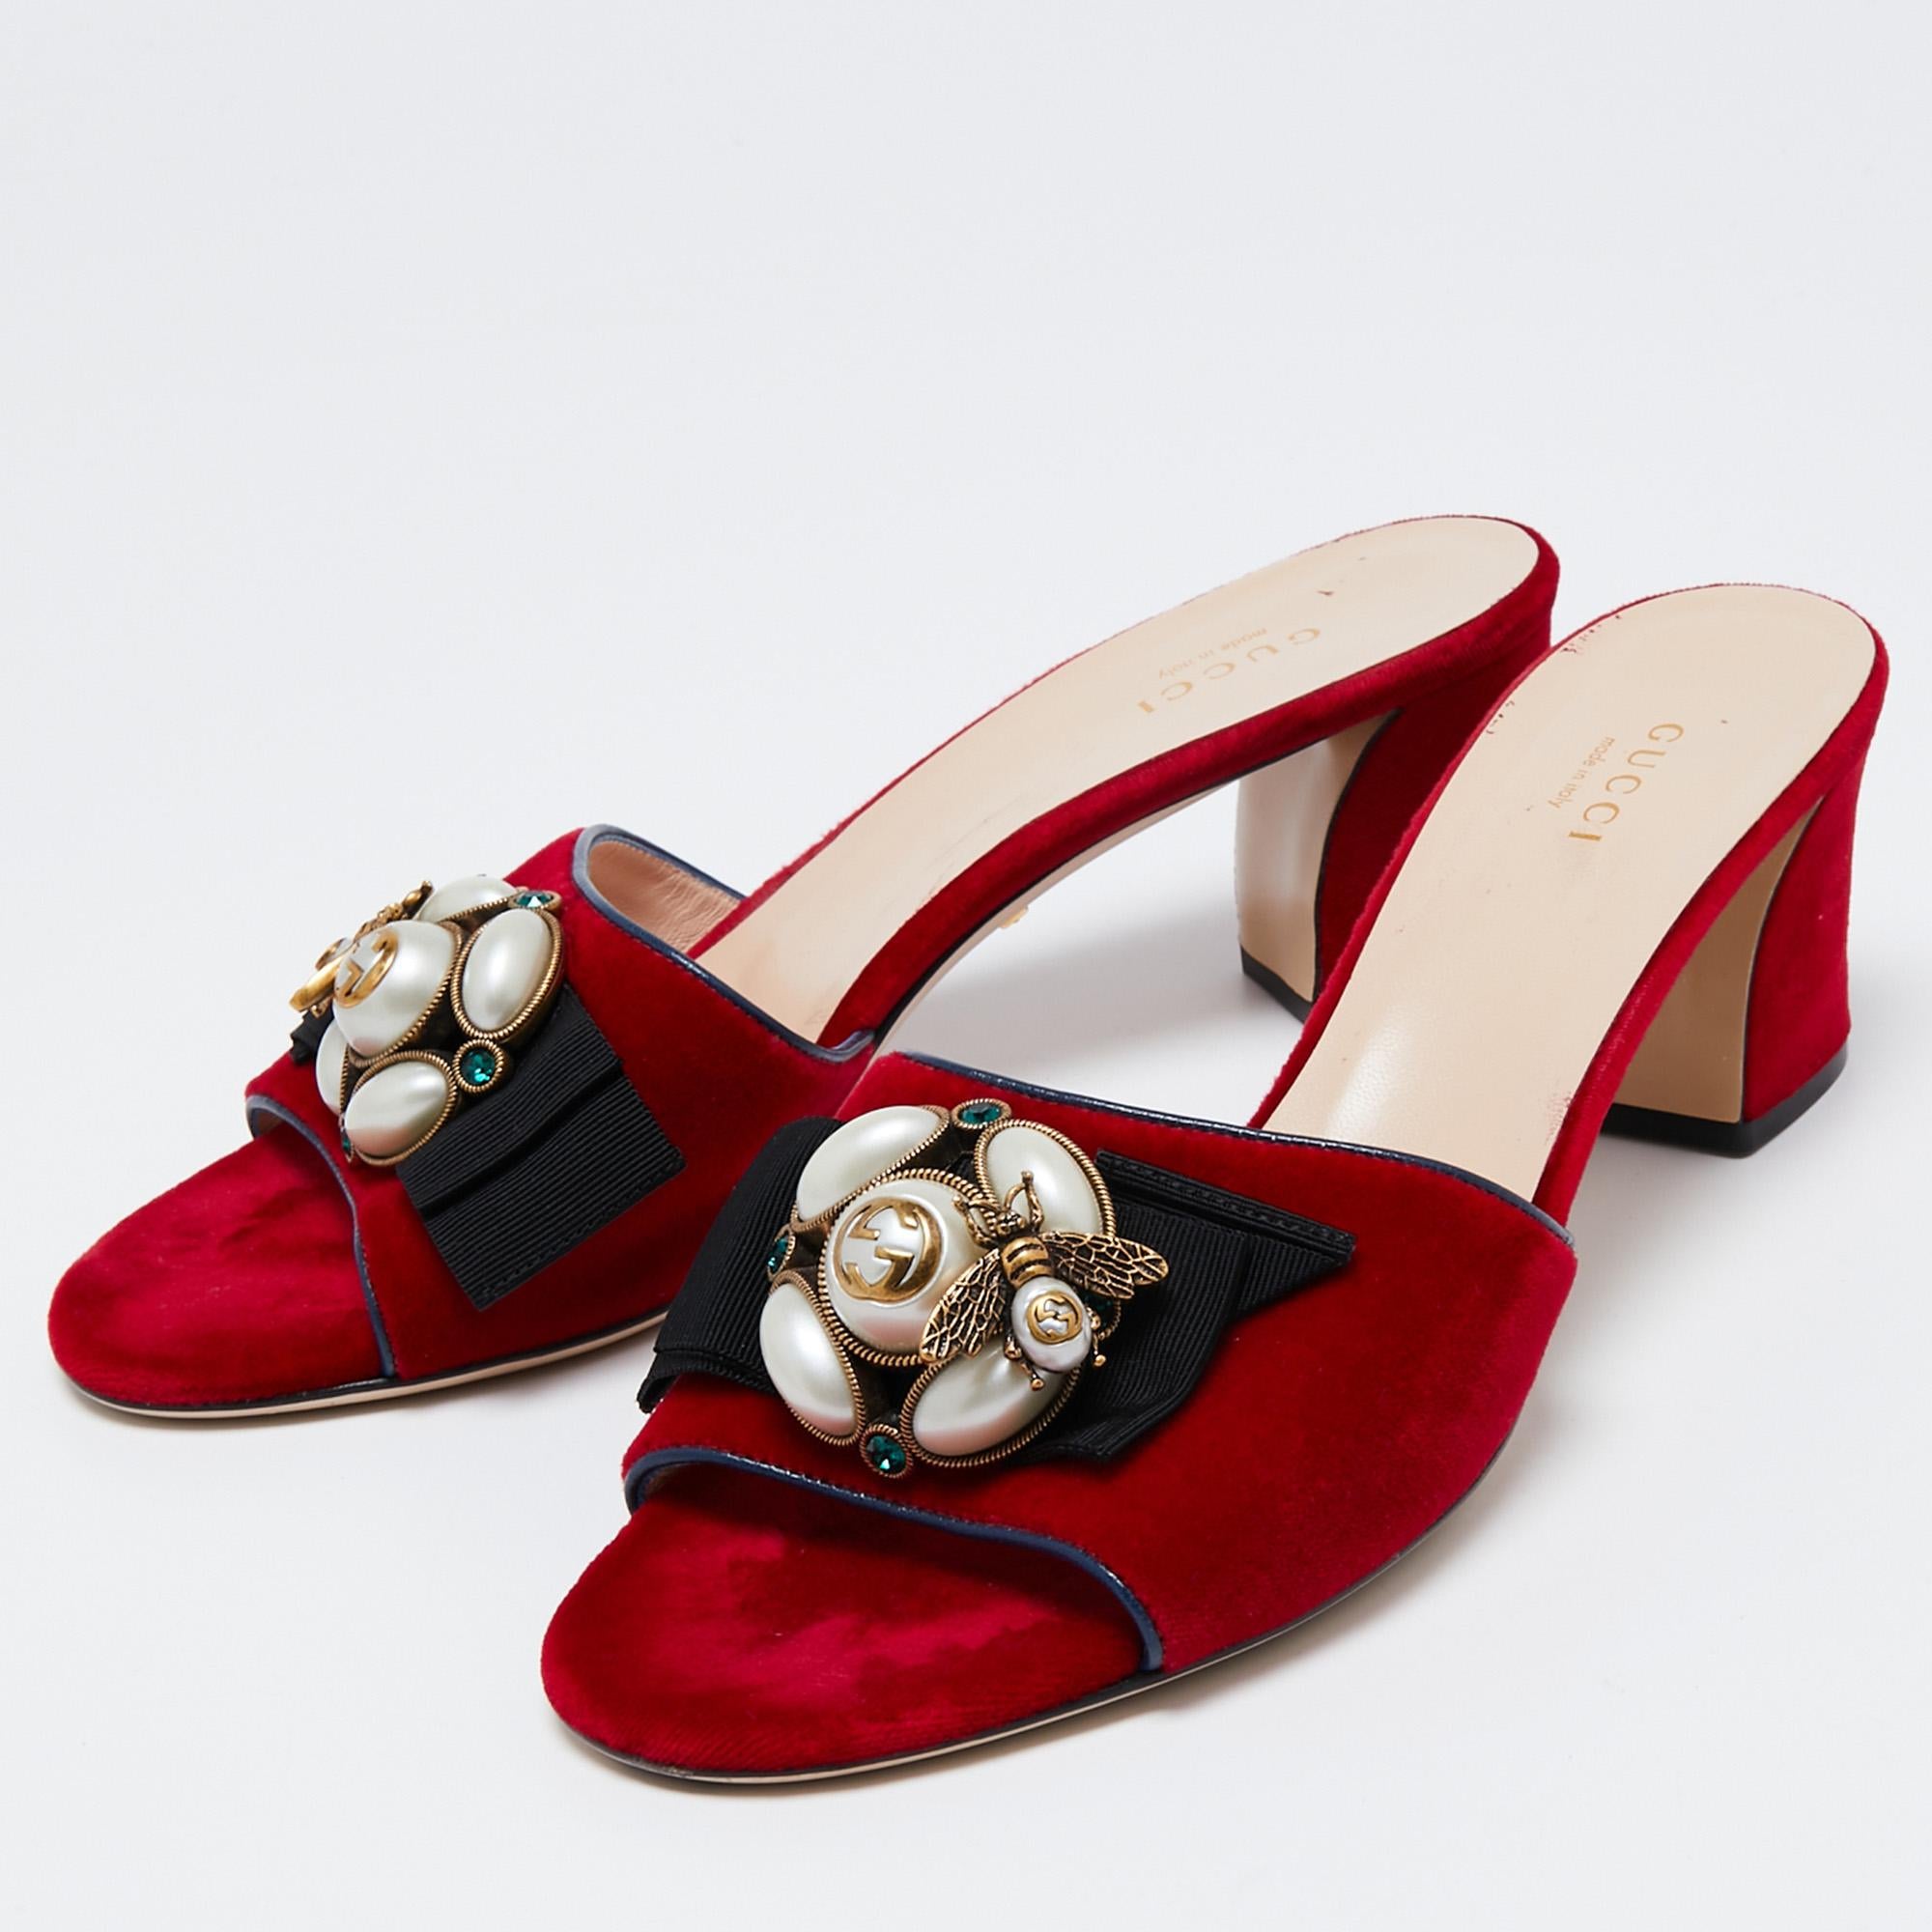 You can count on these sandals from Gucci for an elevated feel. They are crafted from suede as well as leather and designed with open toes, embellishments on the uppers, and short block heels.

Includes: Original Dustbag